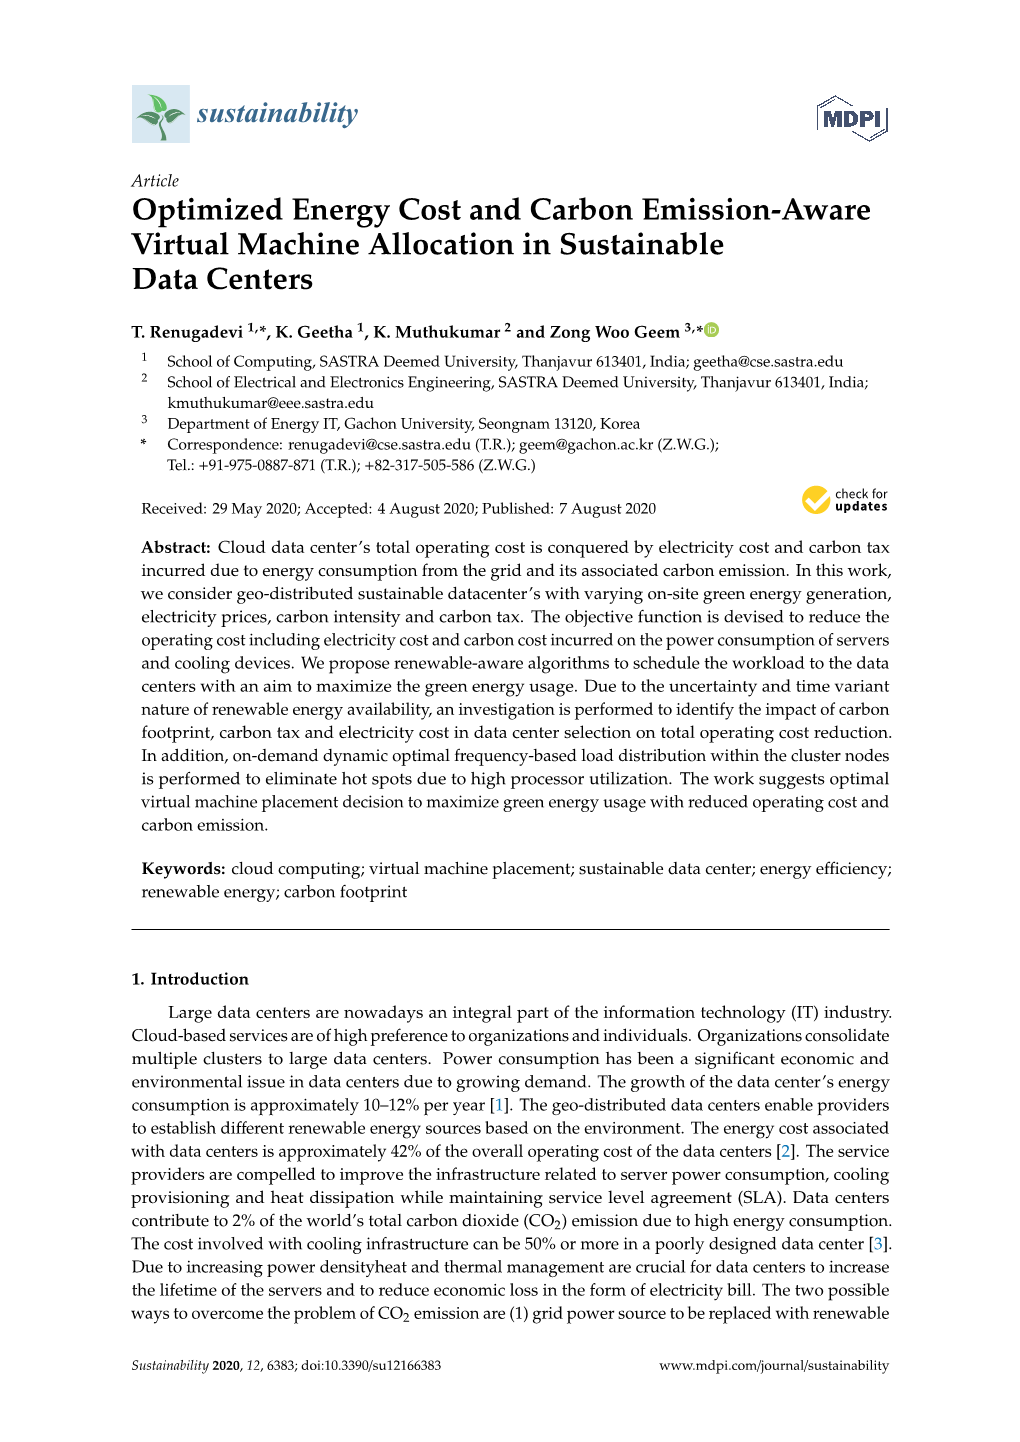 Optimized Energy Cost and Carbon Emission-Aware Virtual Machine Allocation in Sustainable Data Centers